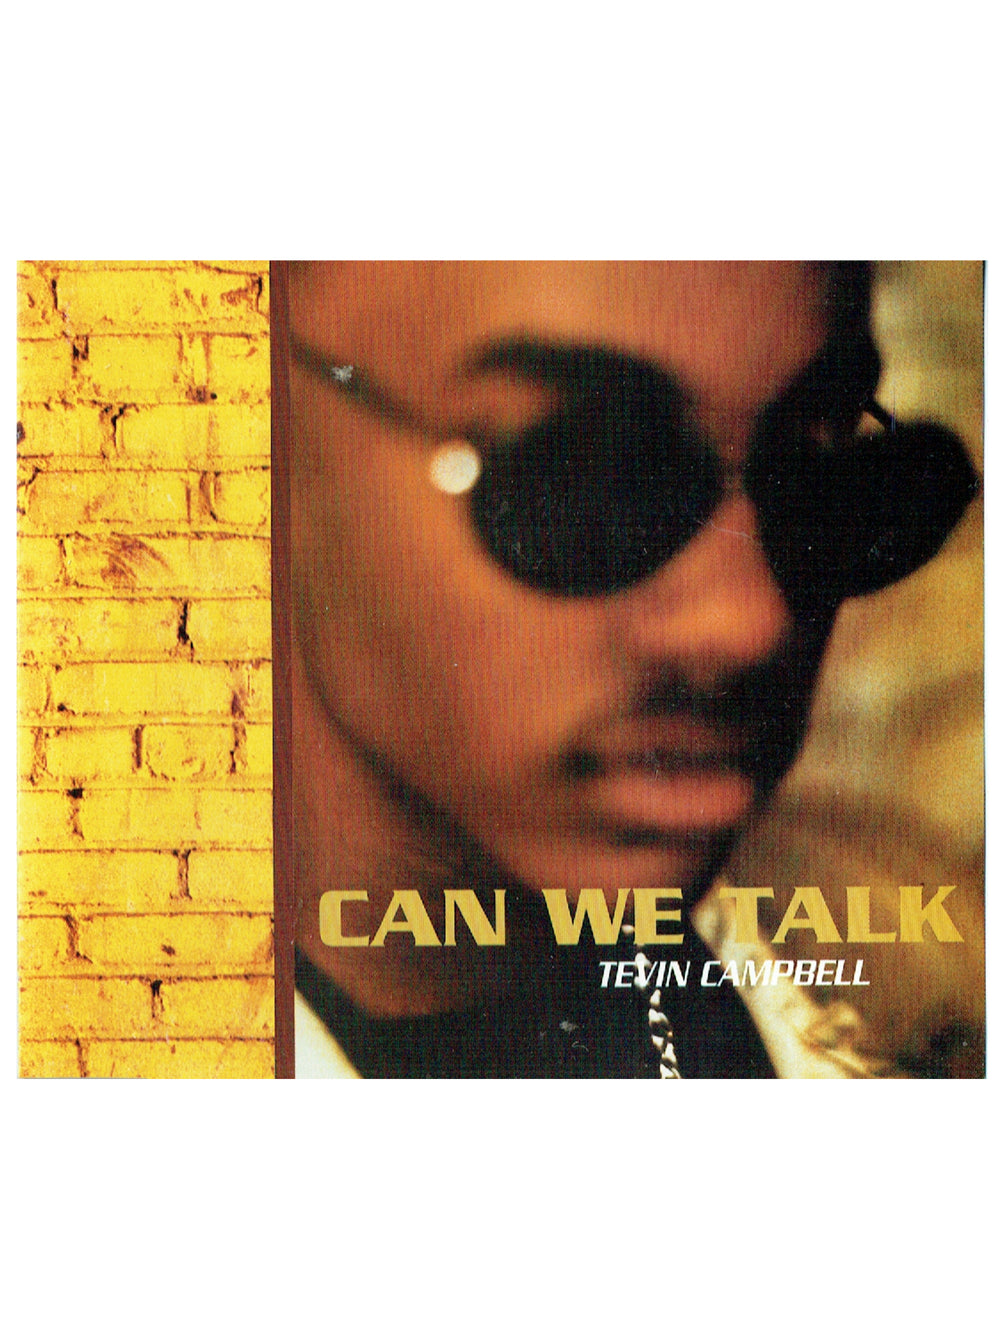 Prince – Tevin Campbell Can We Talk CD Single UK EU 1993 Release Prince